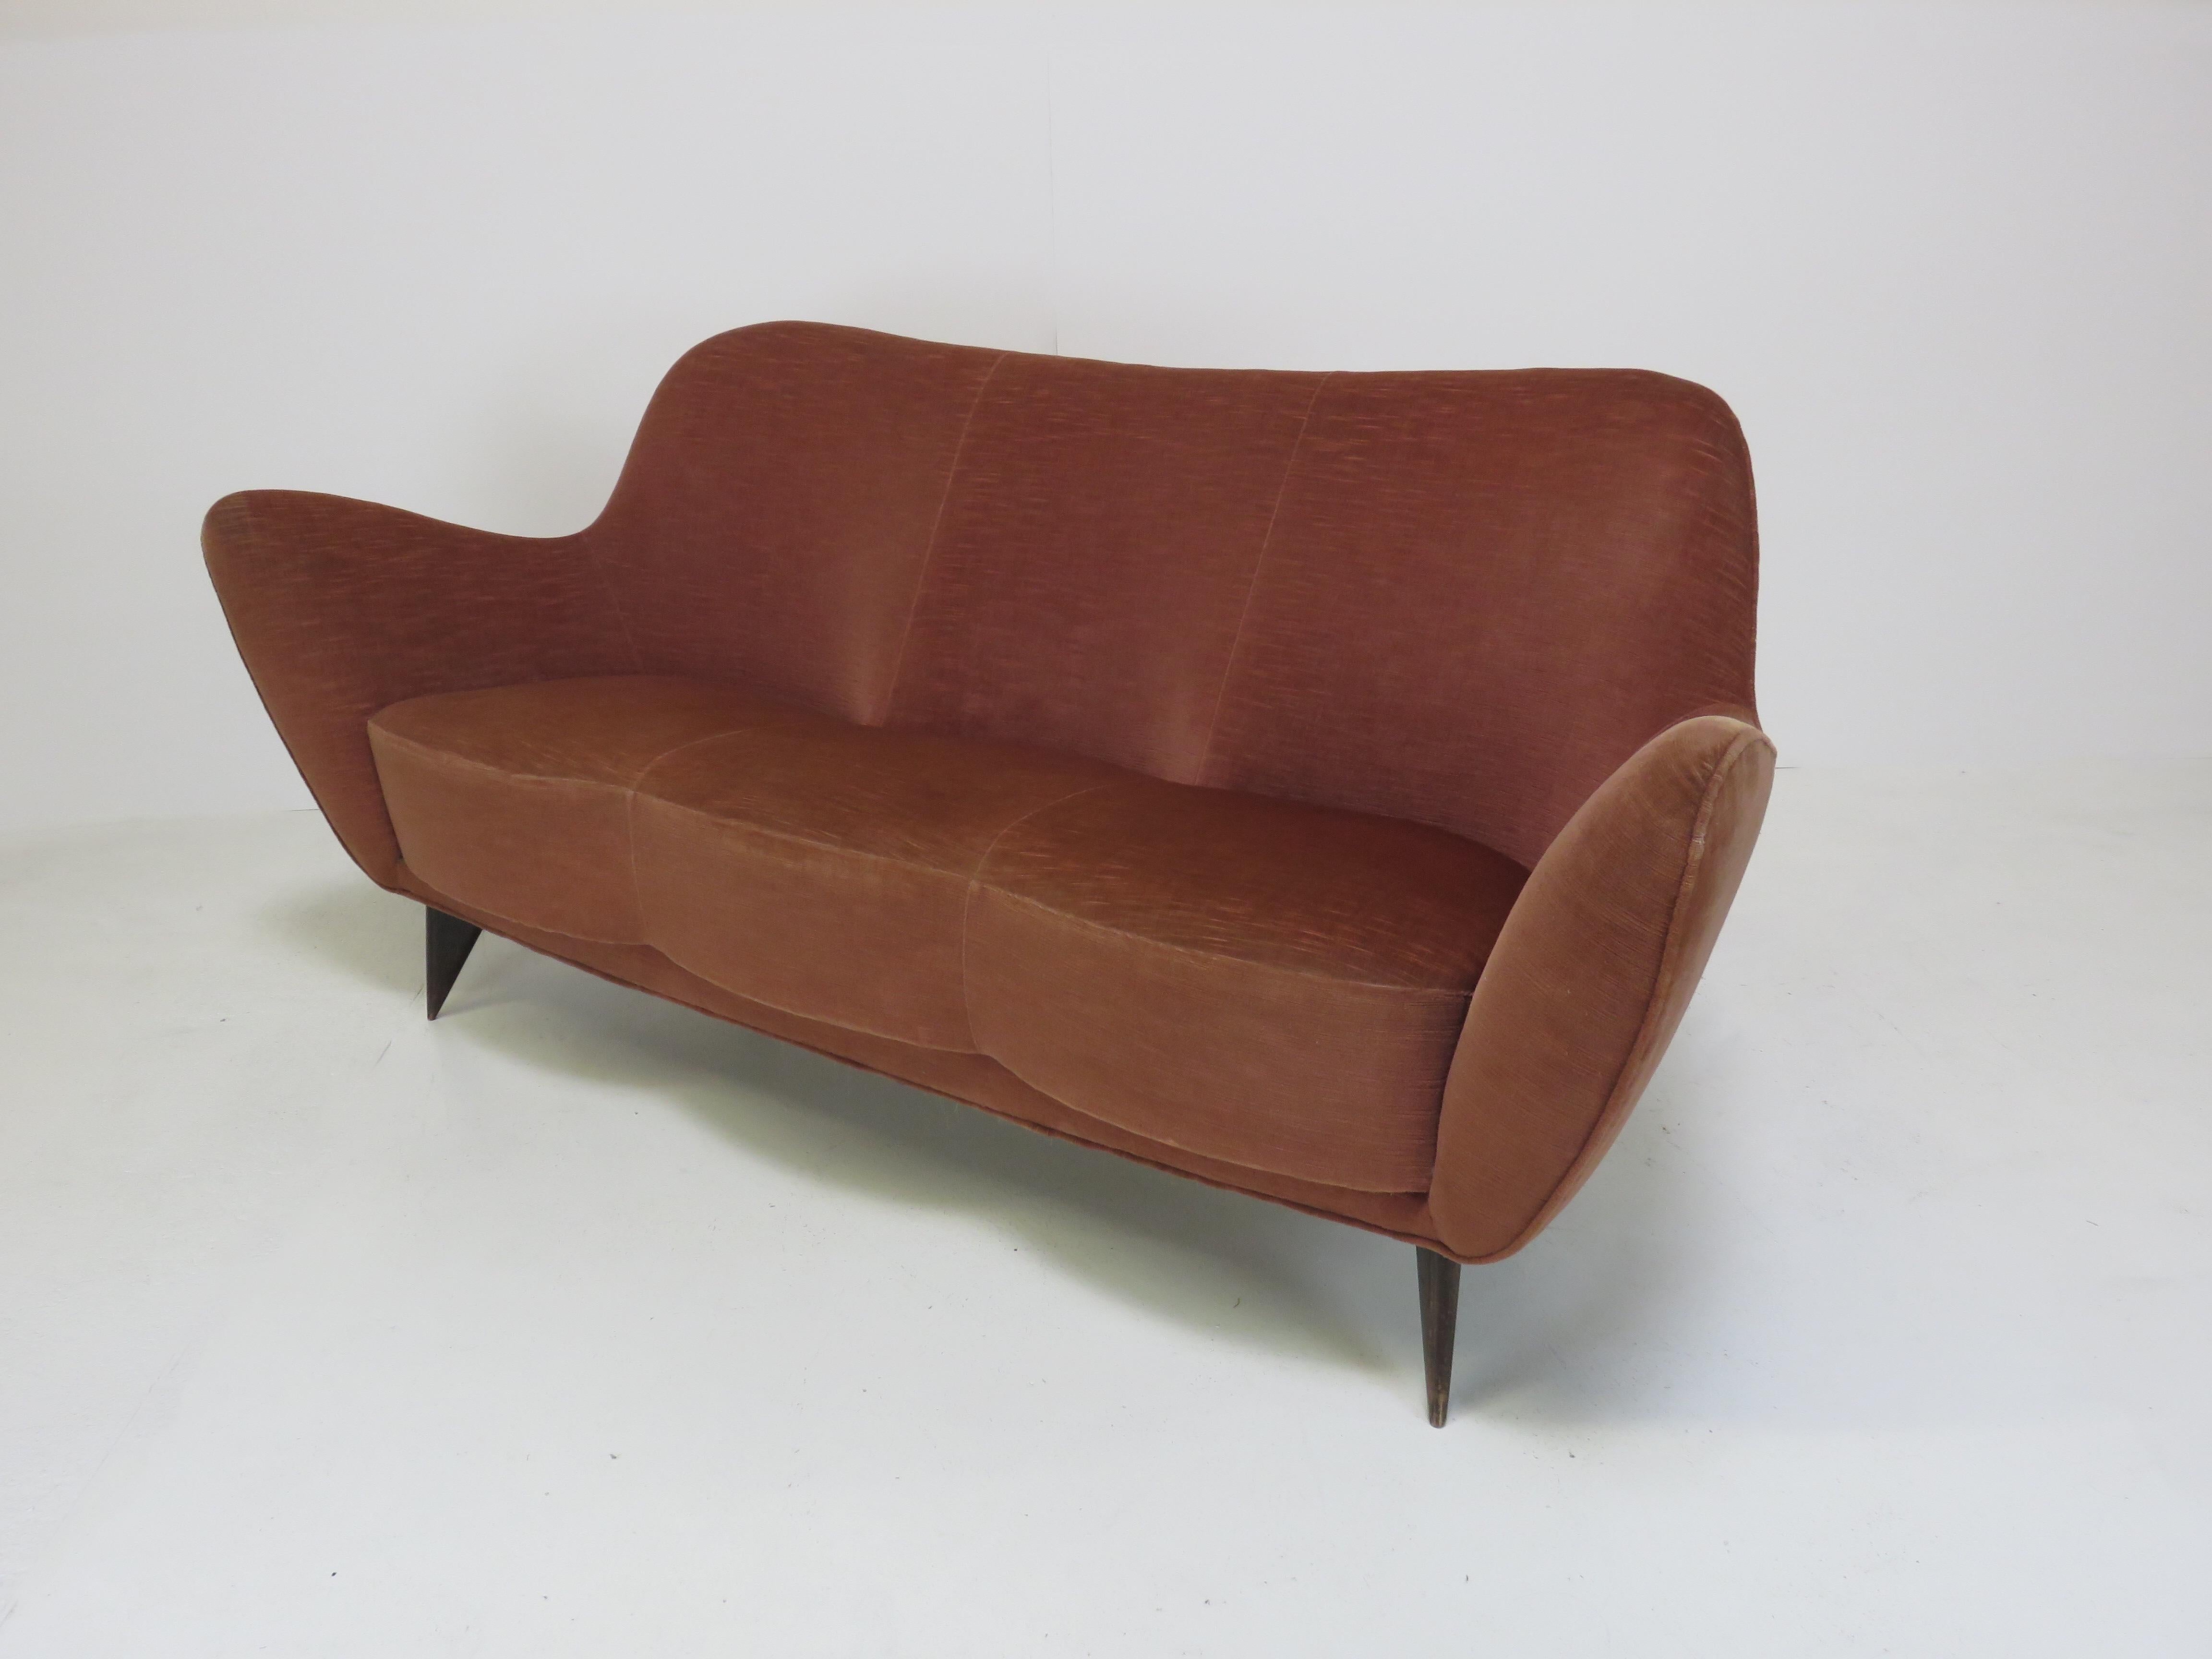 A sofa with three individual seats and a curved back on each section. Tapered wood legs. 
Made for ISA Italy, c. 1952.